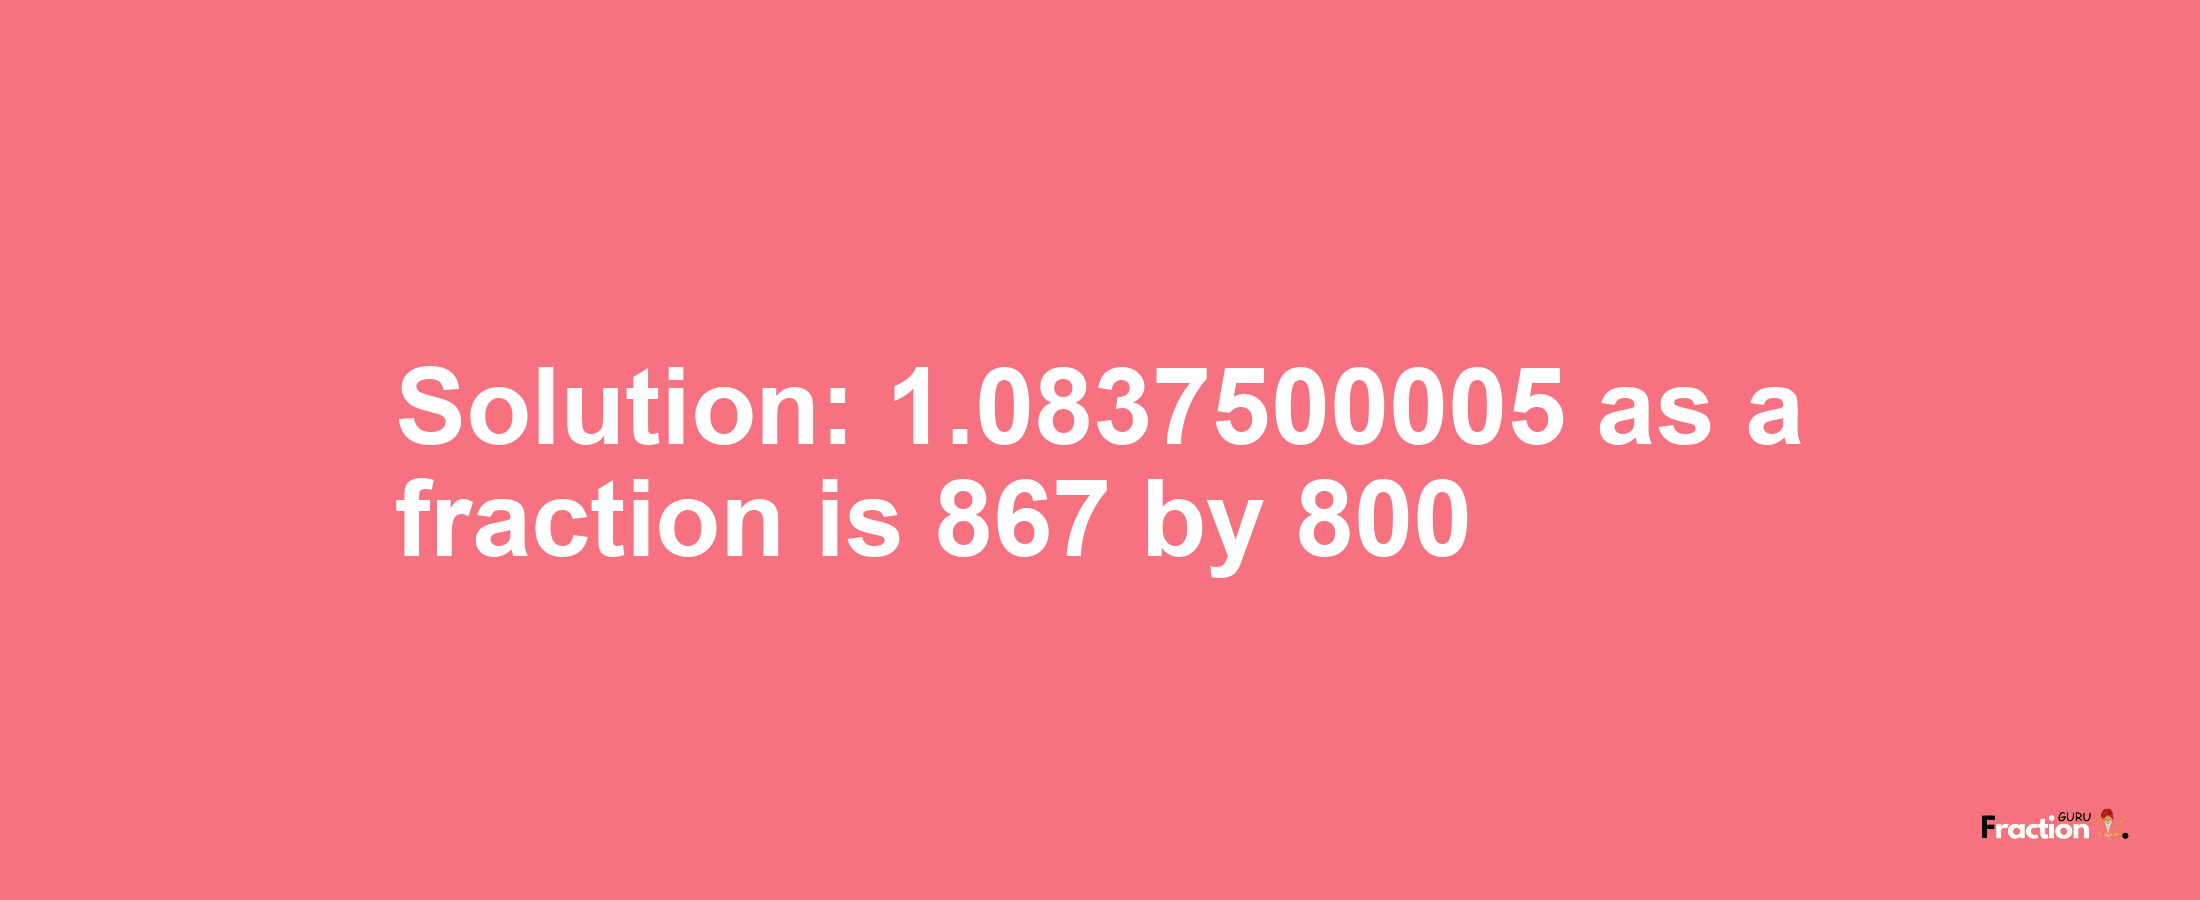 Solution:1.0837500005 as a fraction is 867/800